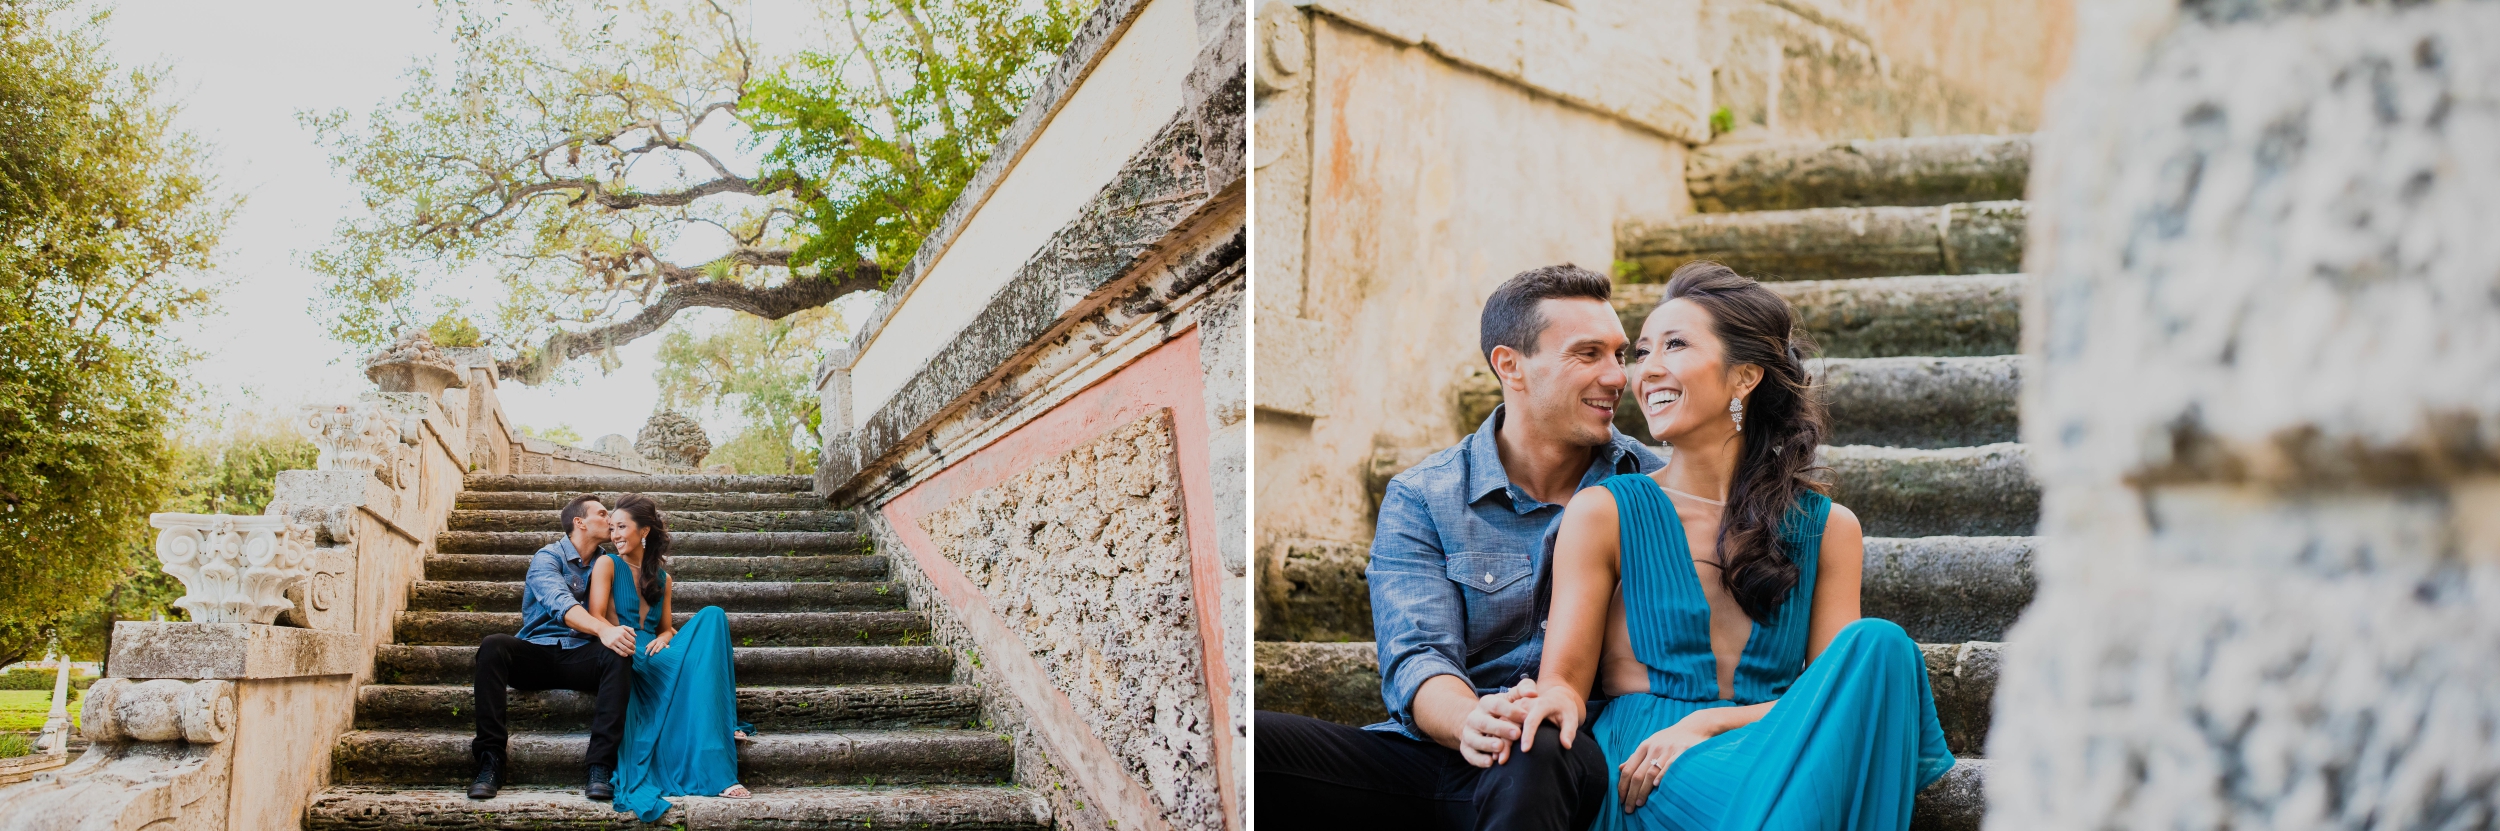 Vizcaya Museum and Gardens Engagement Session Santy Martinez Photography 1.jpg